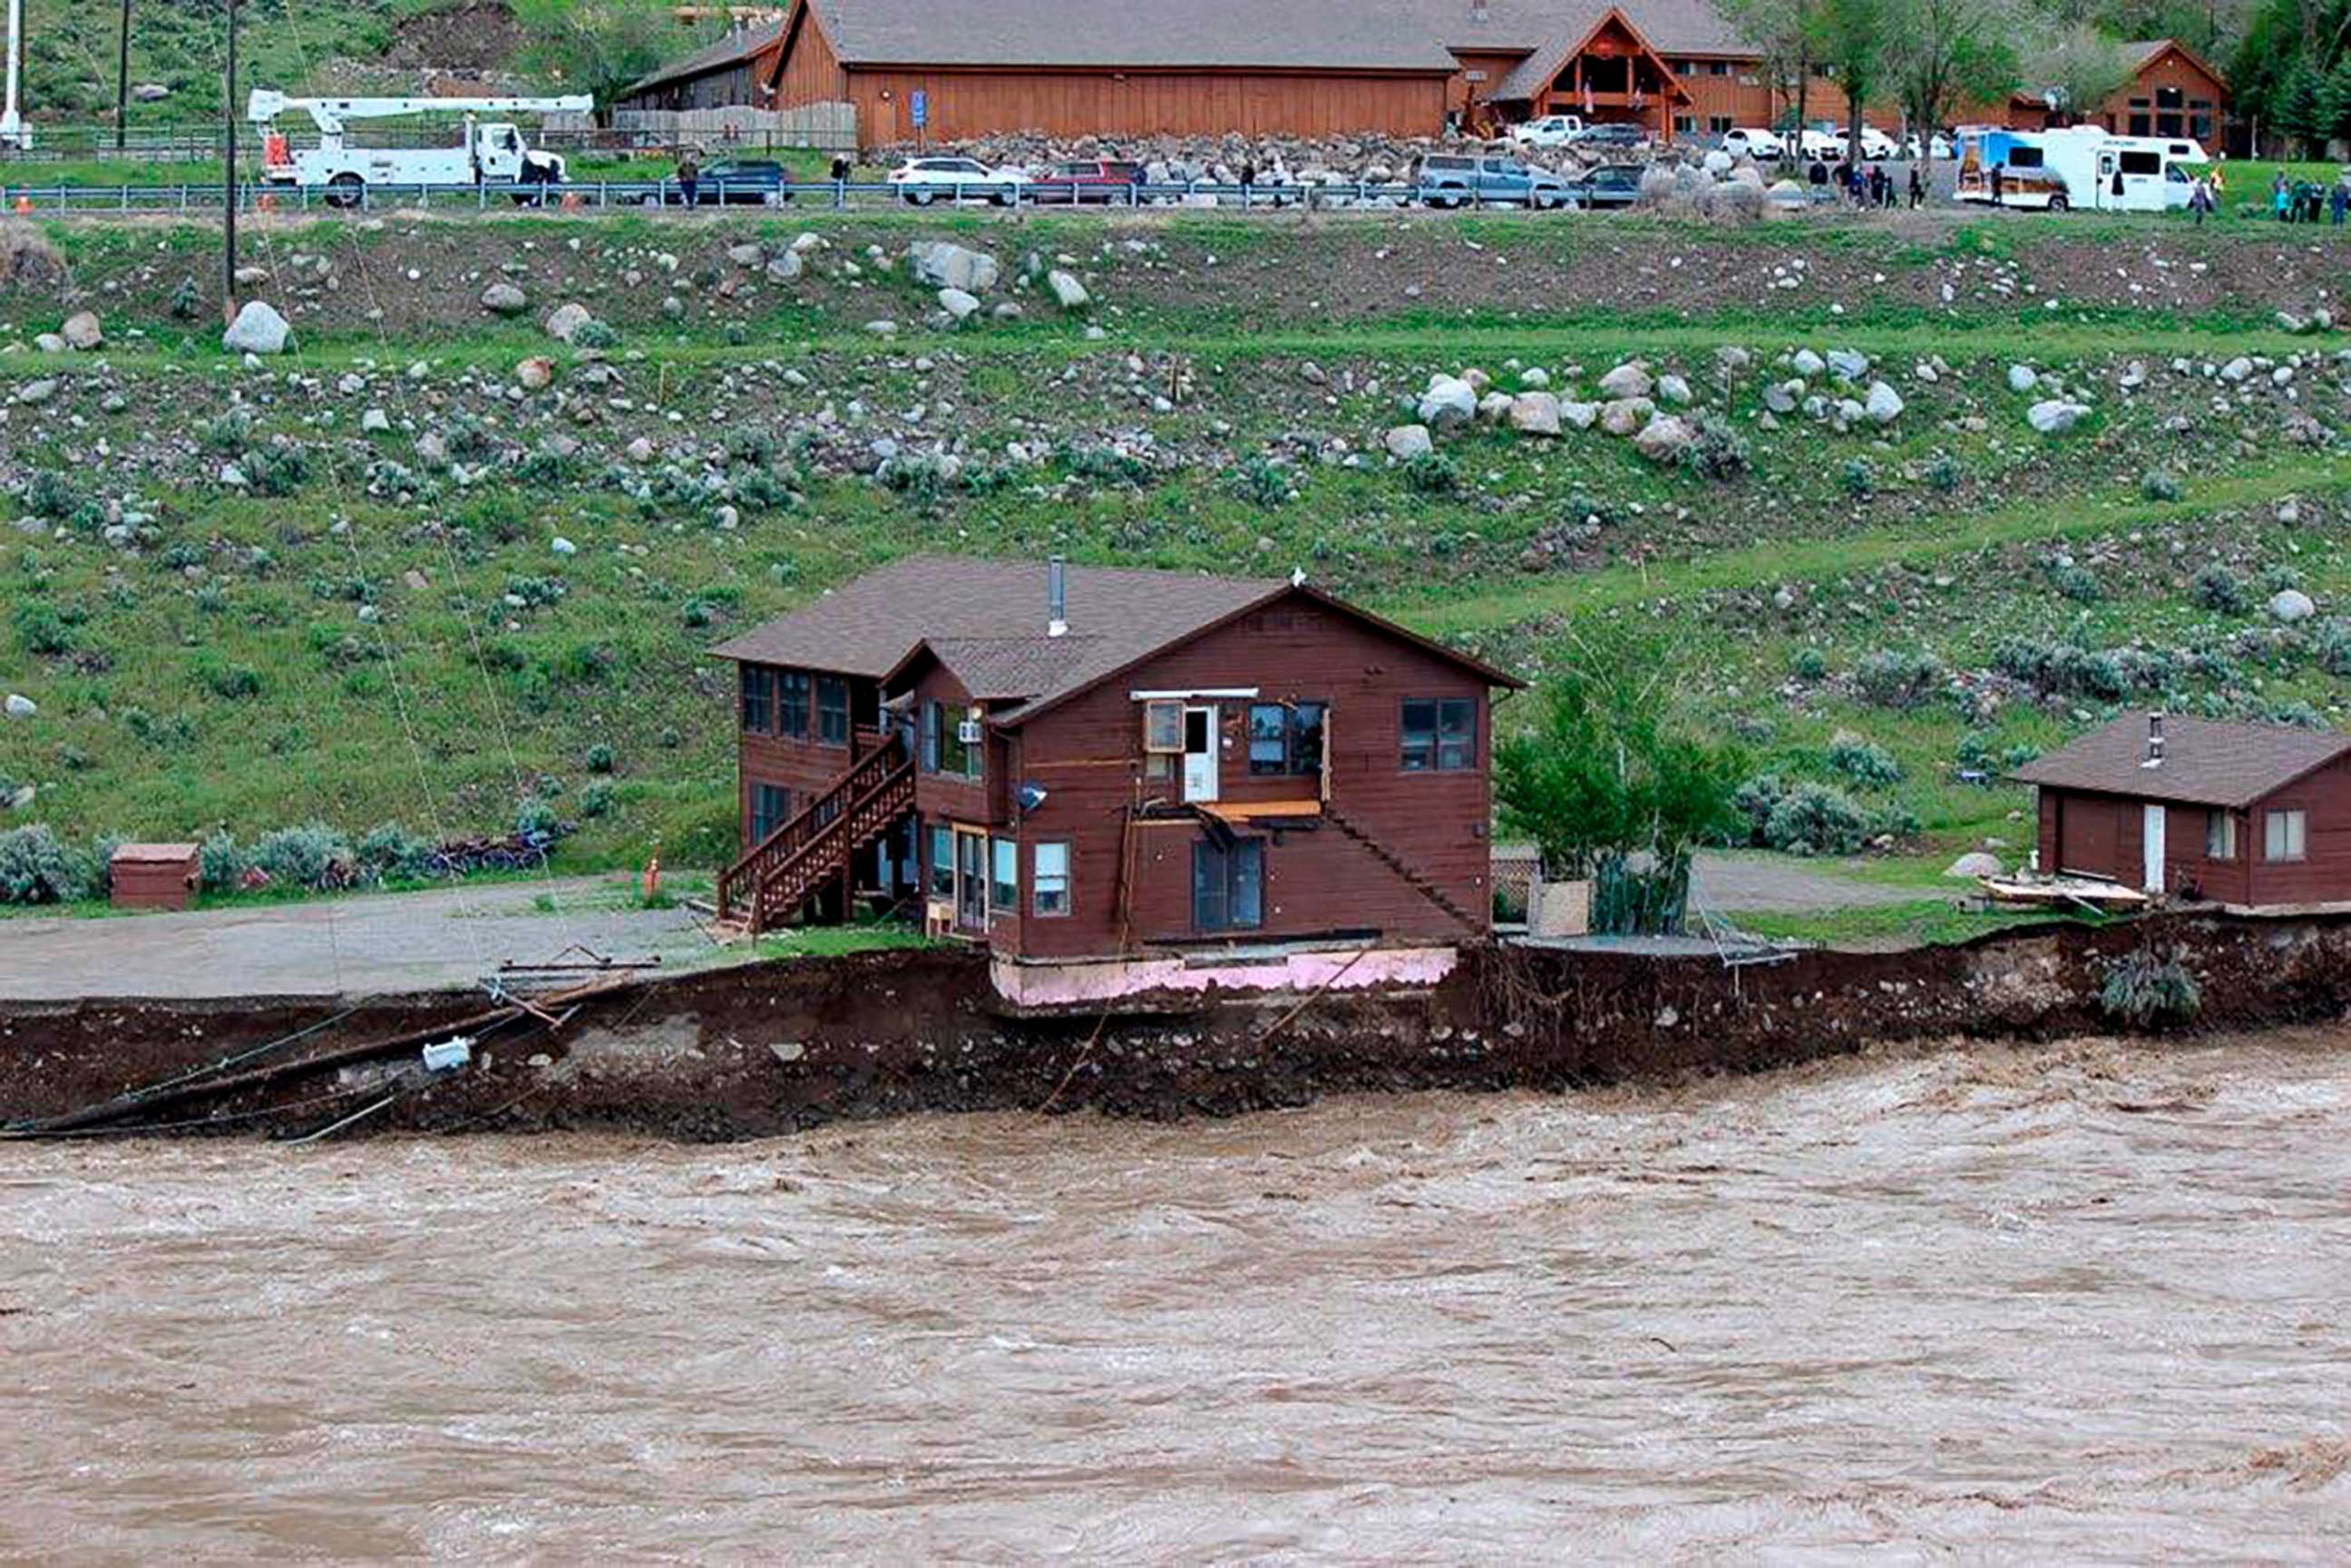 PHOTO: The flooding Yellowstone River undercuts the river bank, threatening a house and a garage in Gardiner, Mont., June 13, 2022.